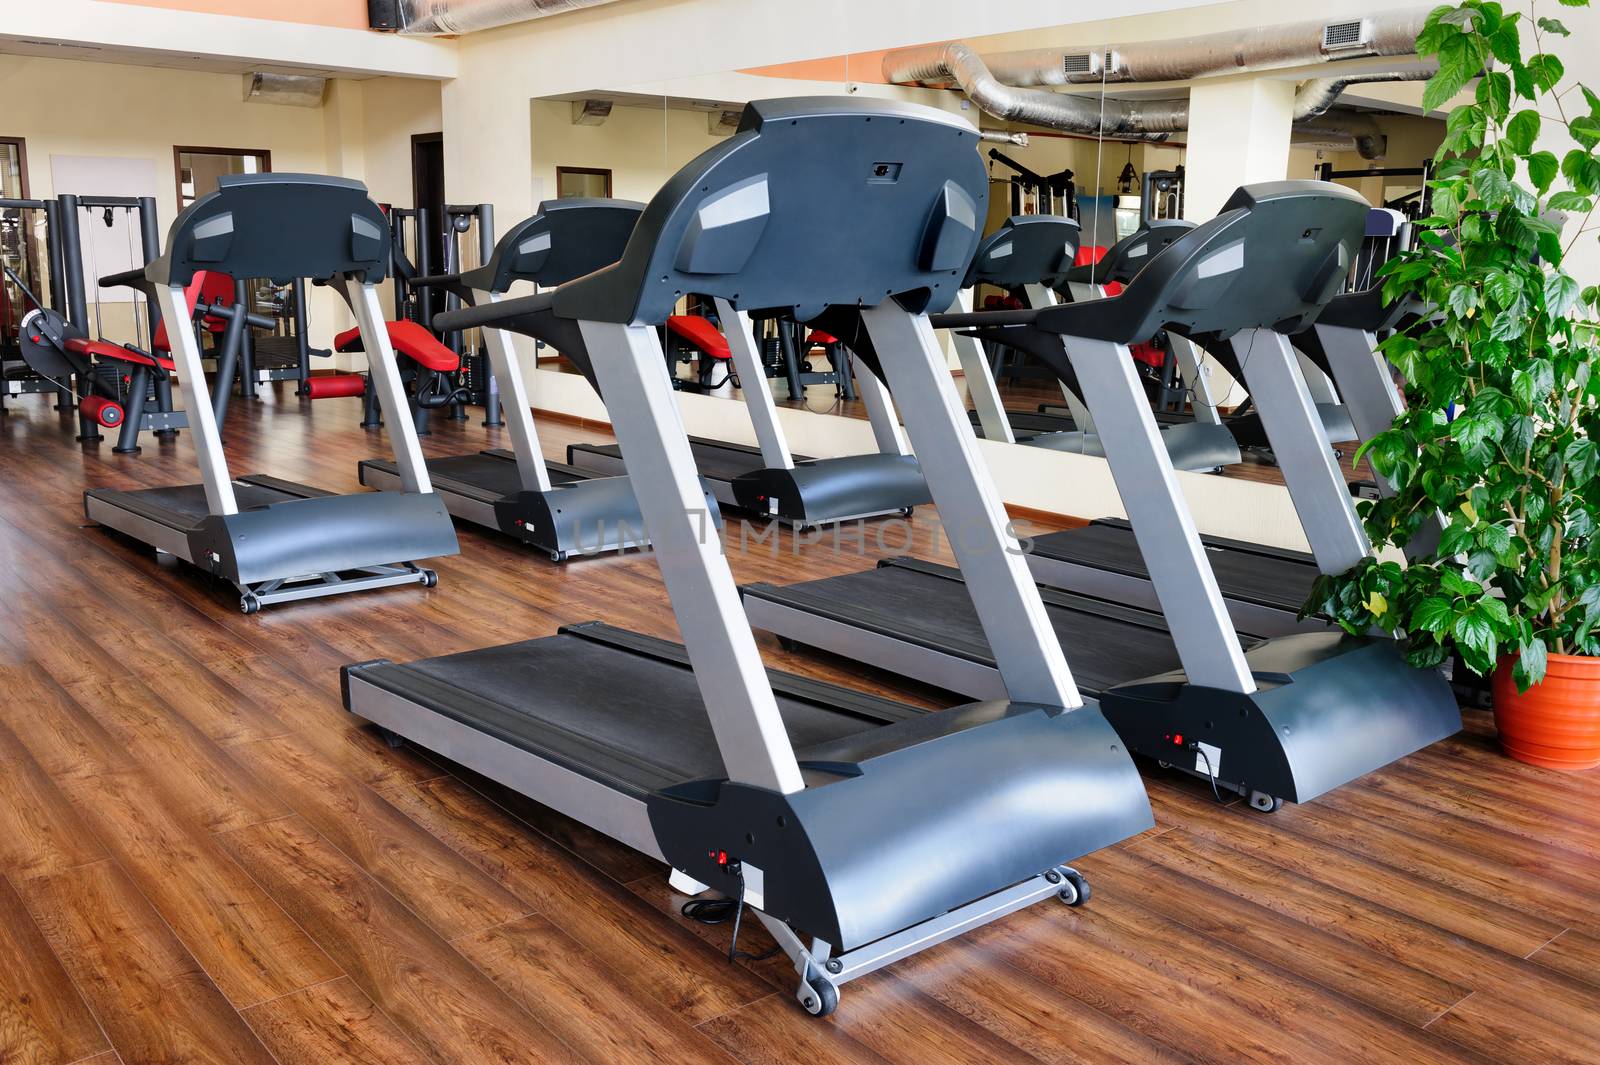 Set of treadmills staying in line in the gym